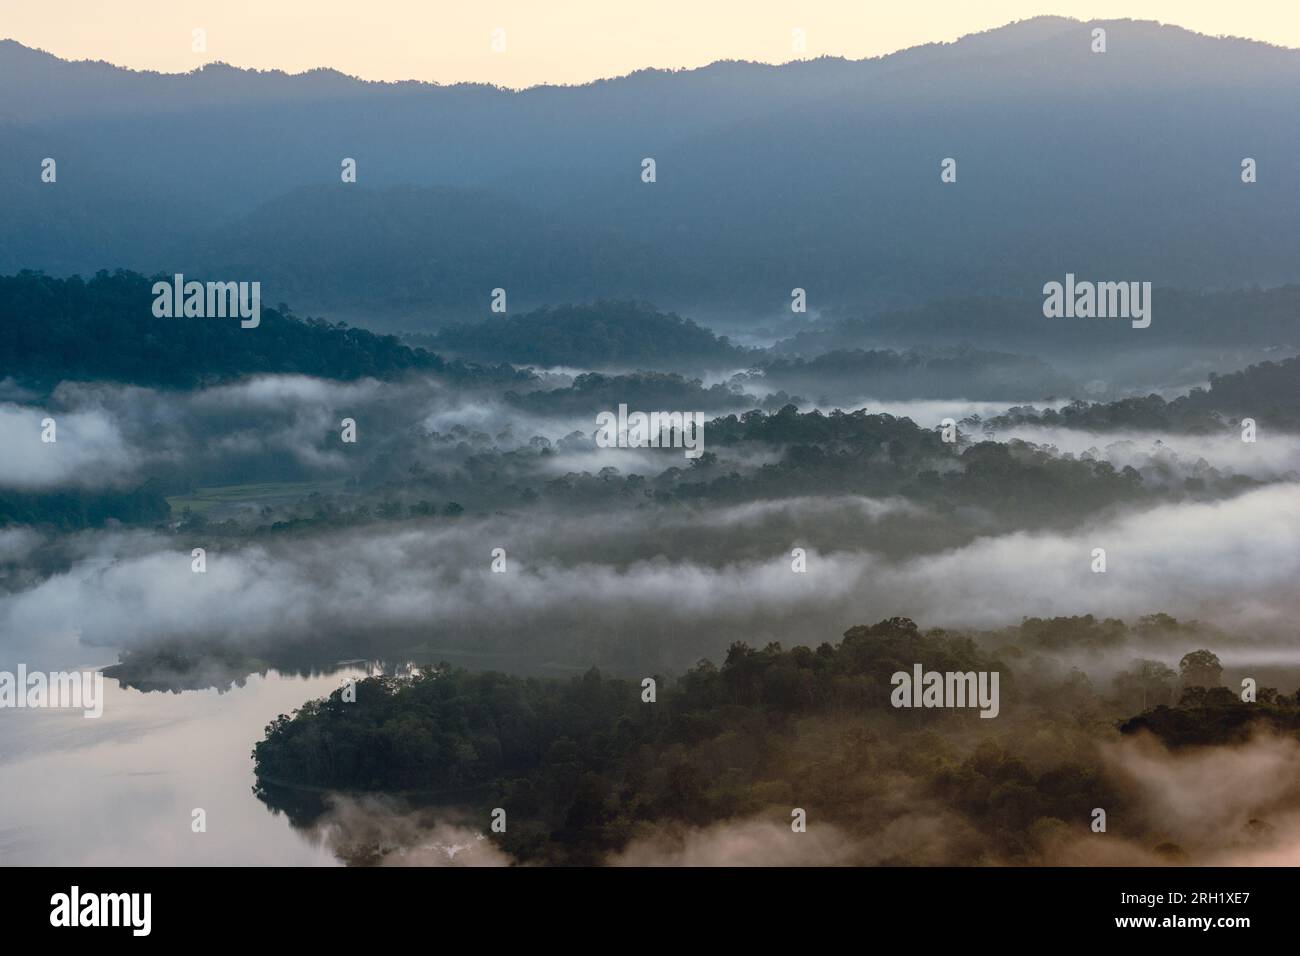 Misty morning from the hills Stock Photo